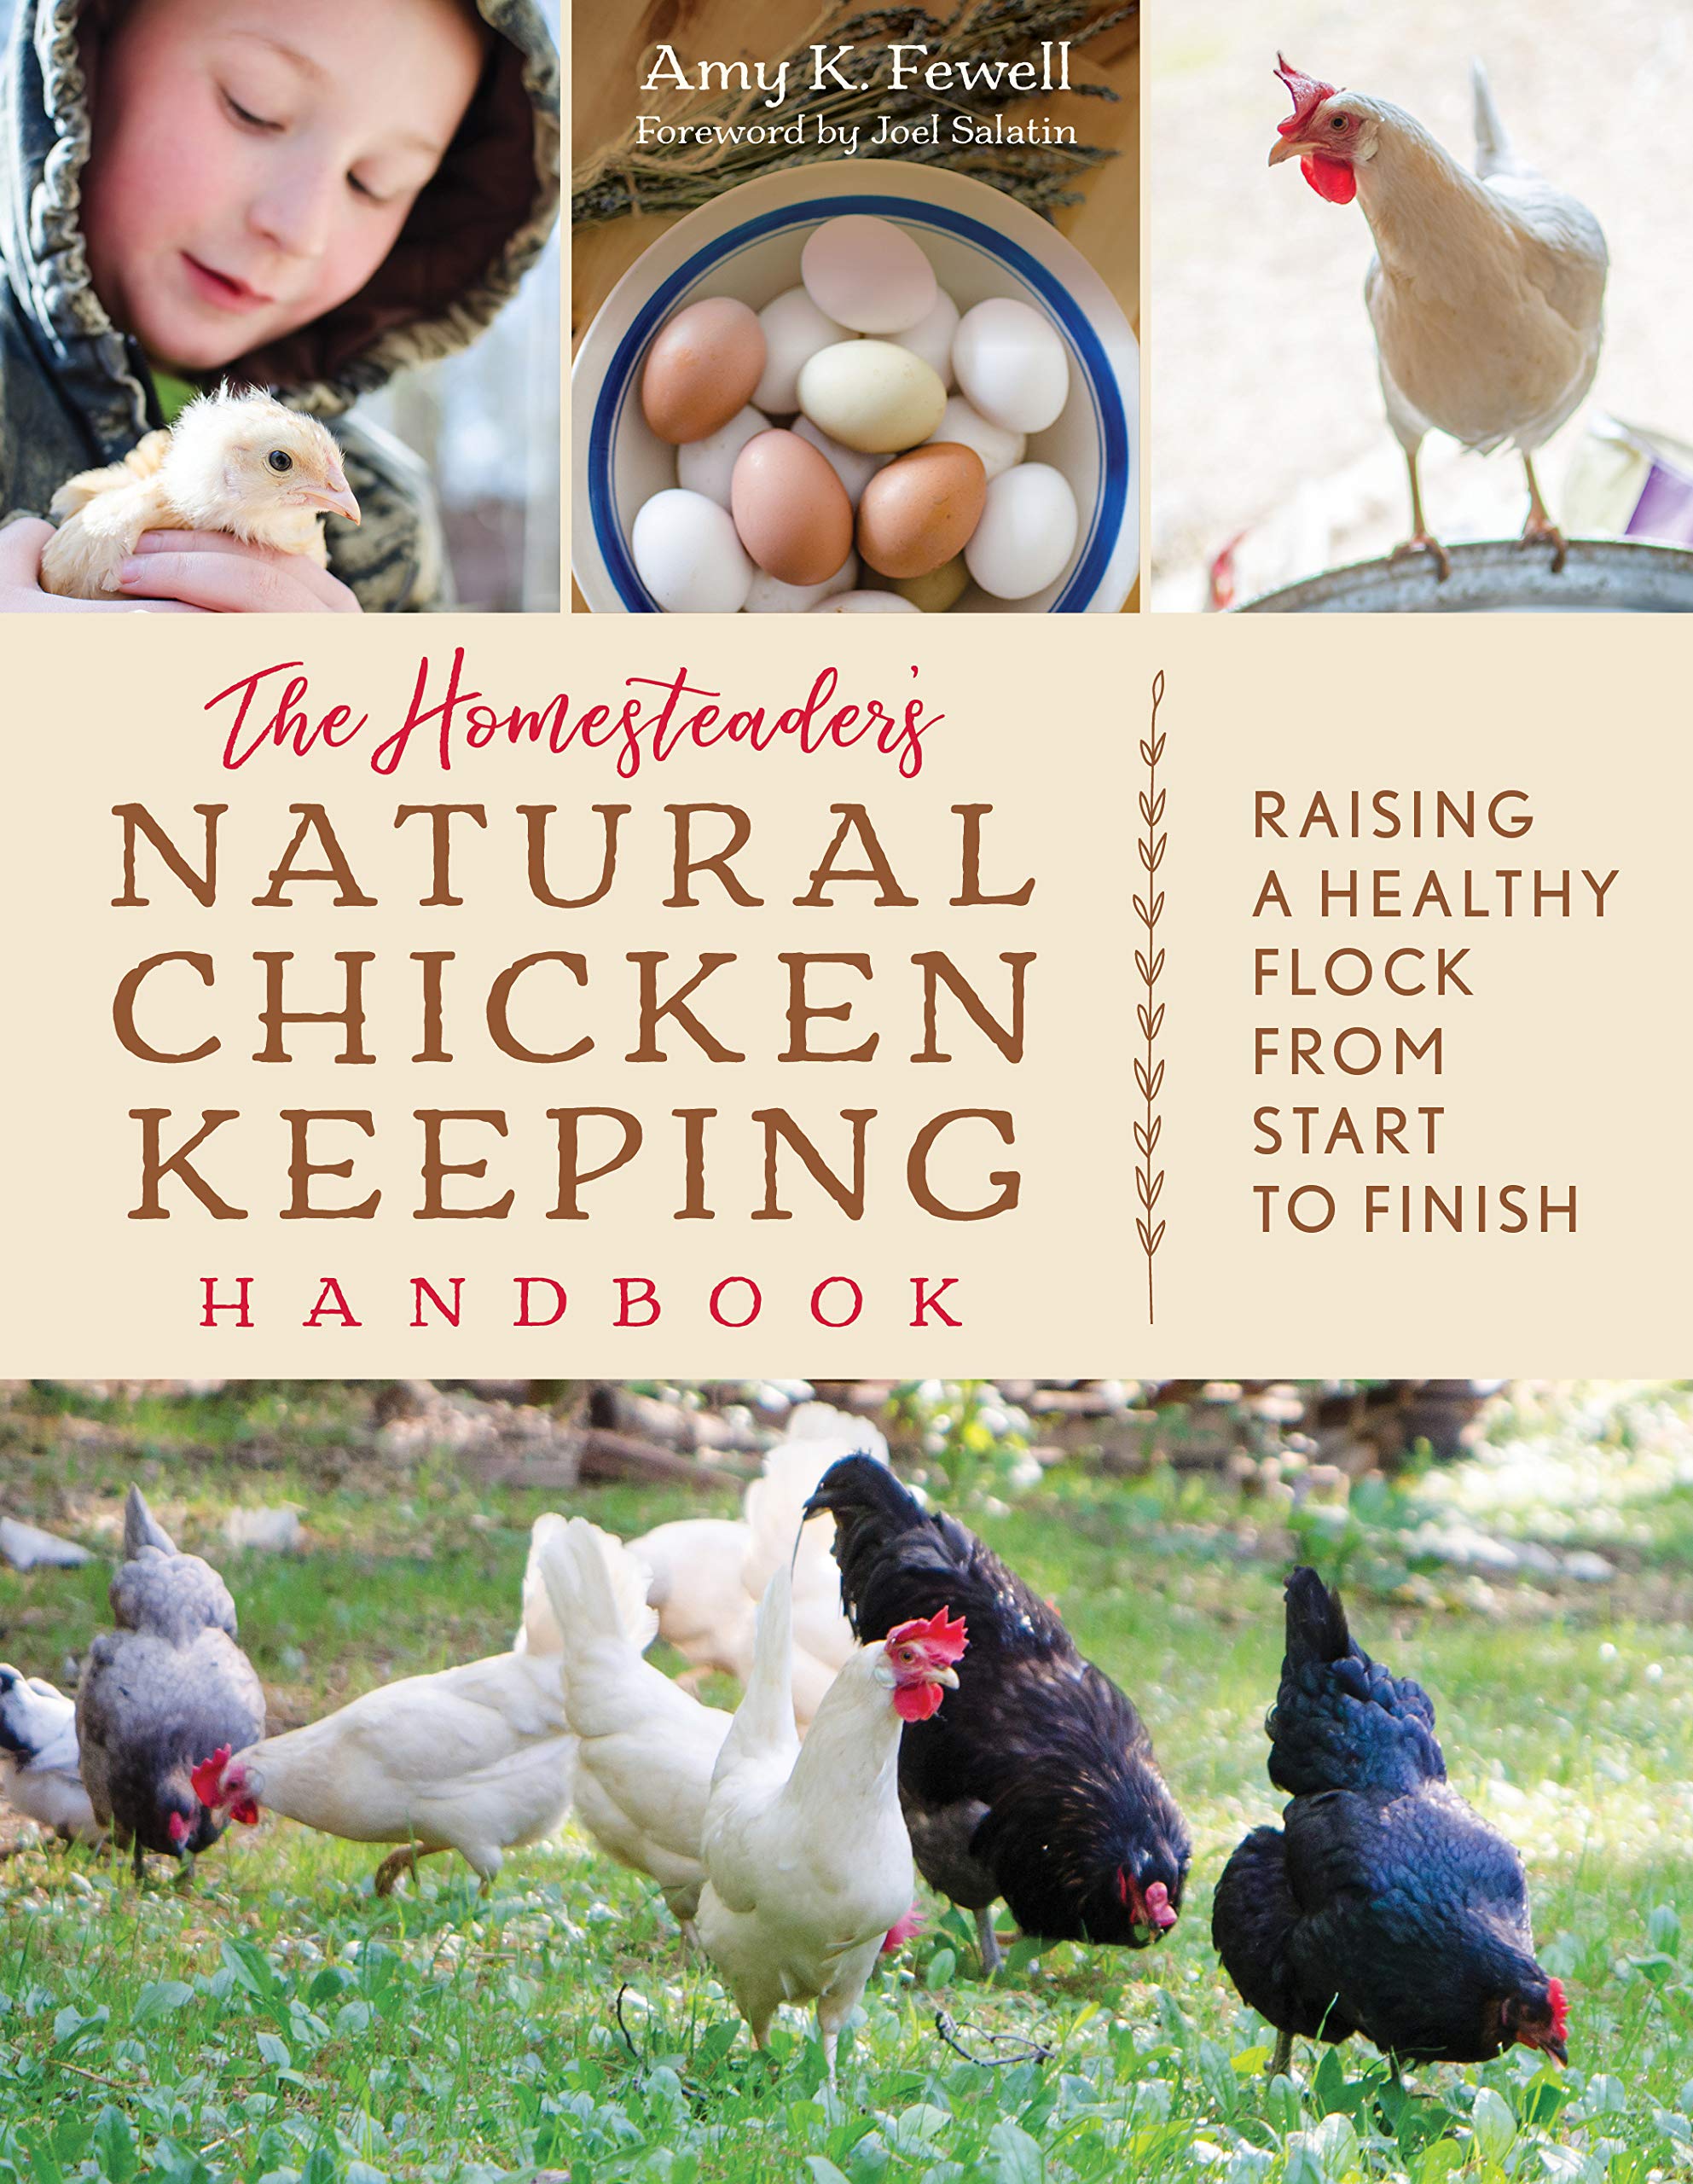 Raising Chickens, Keeping The Home Flock Healthy